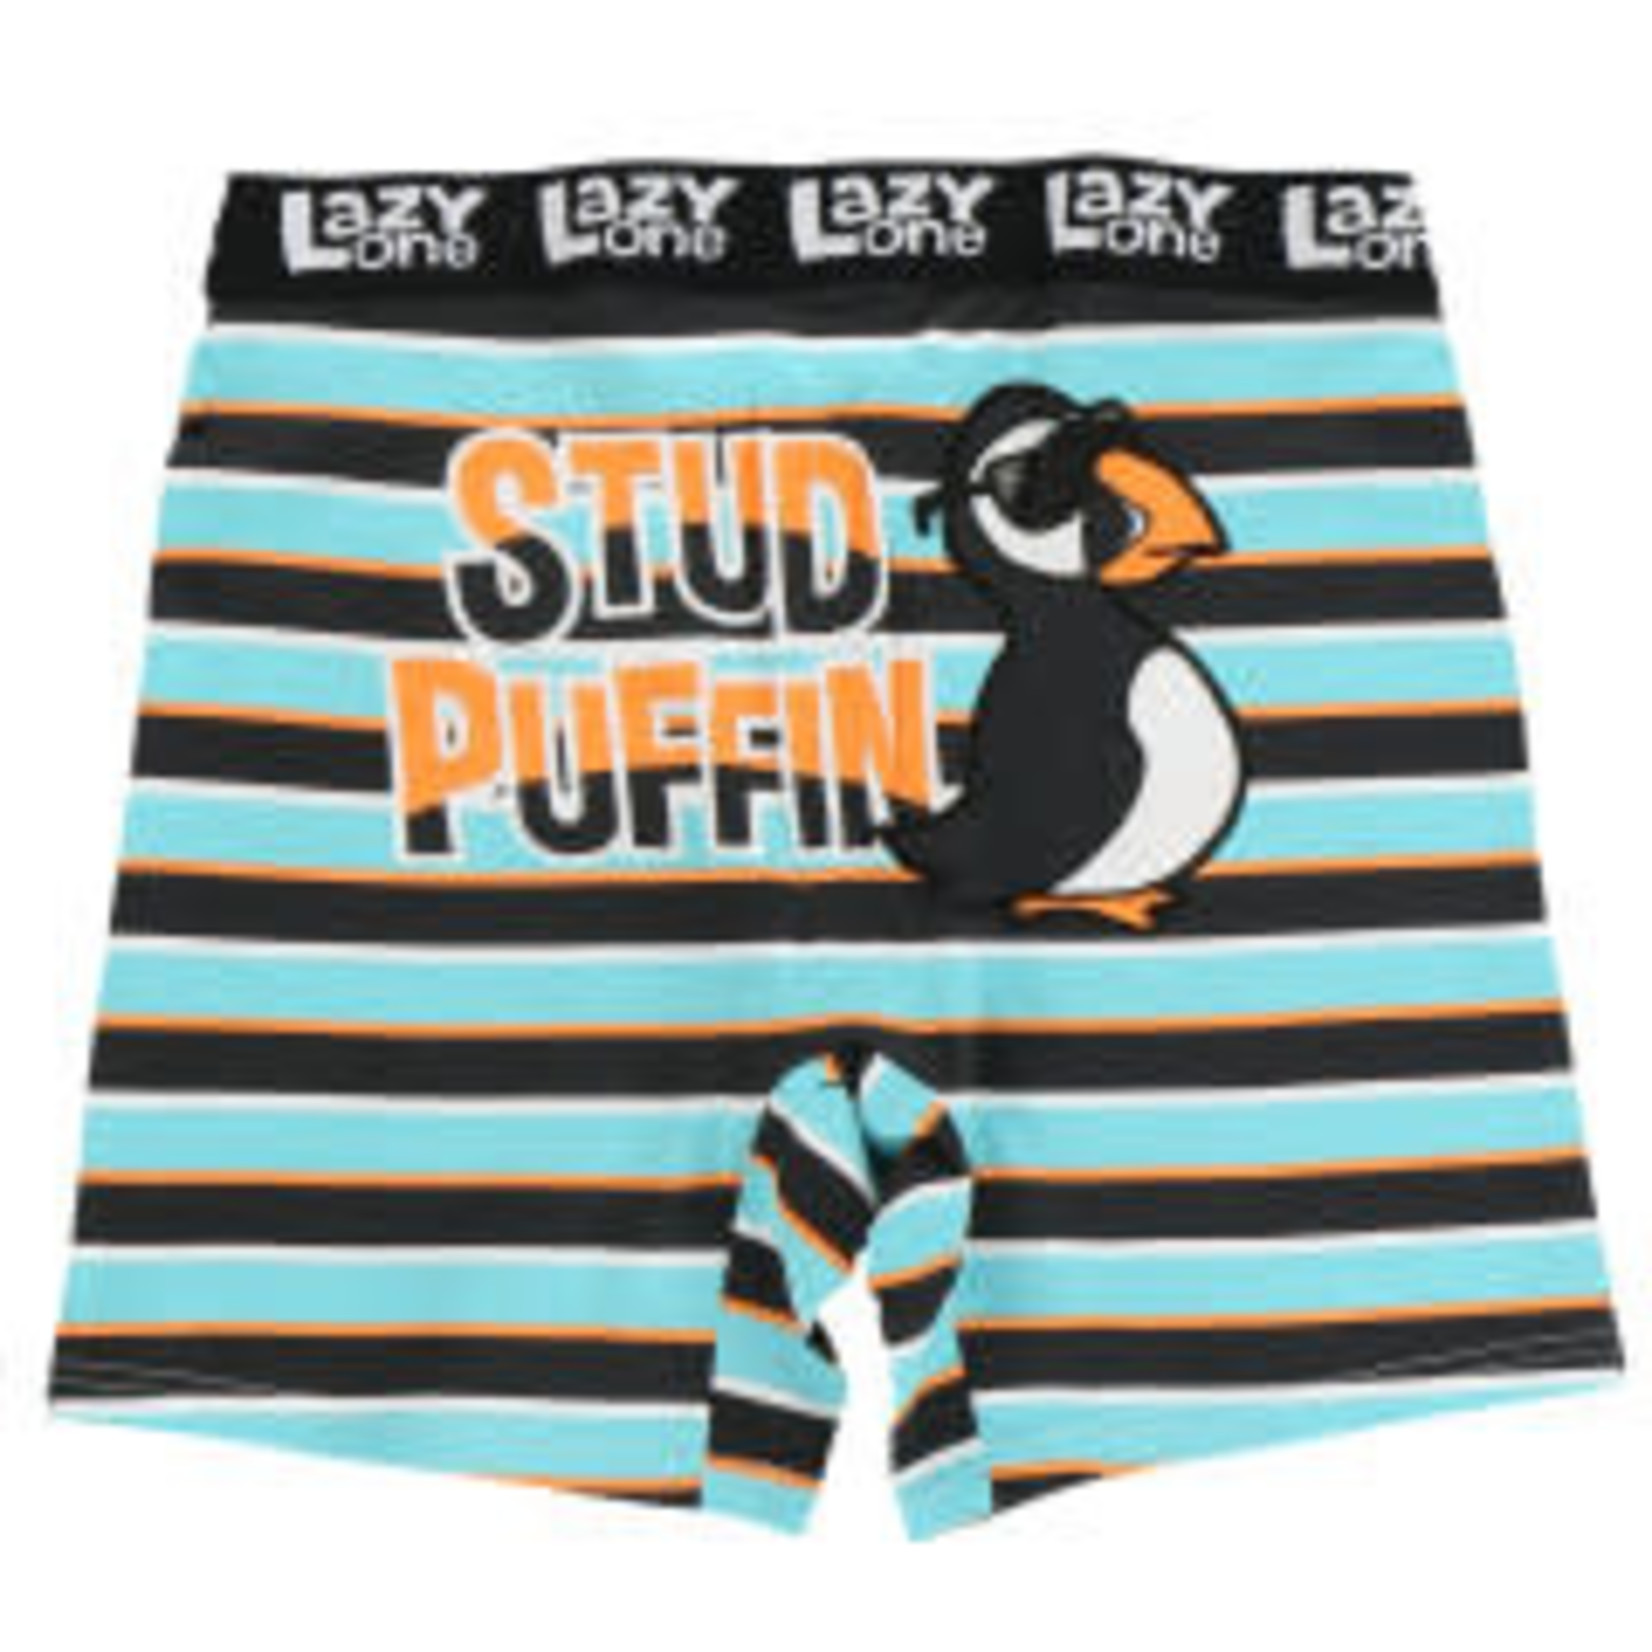 Lazy One Stud Puffin Boxer Brief - Kathryn's on Main